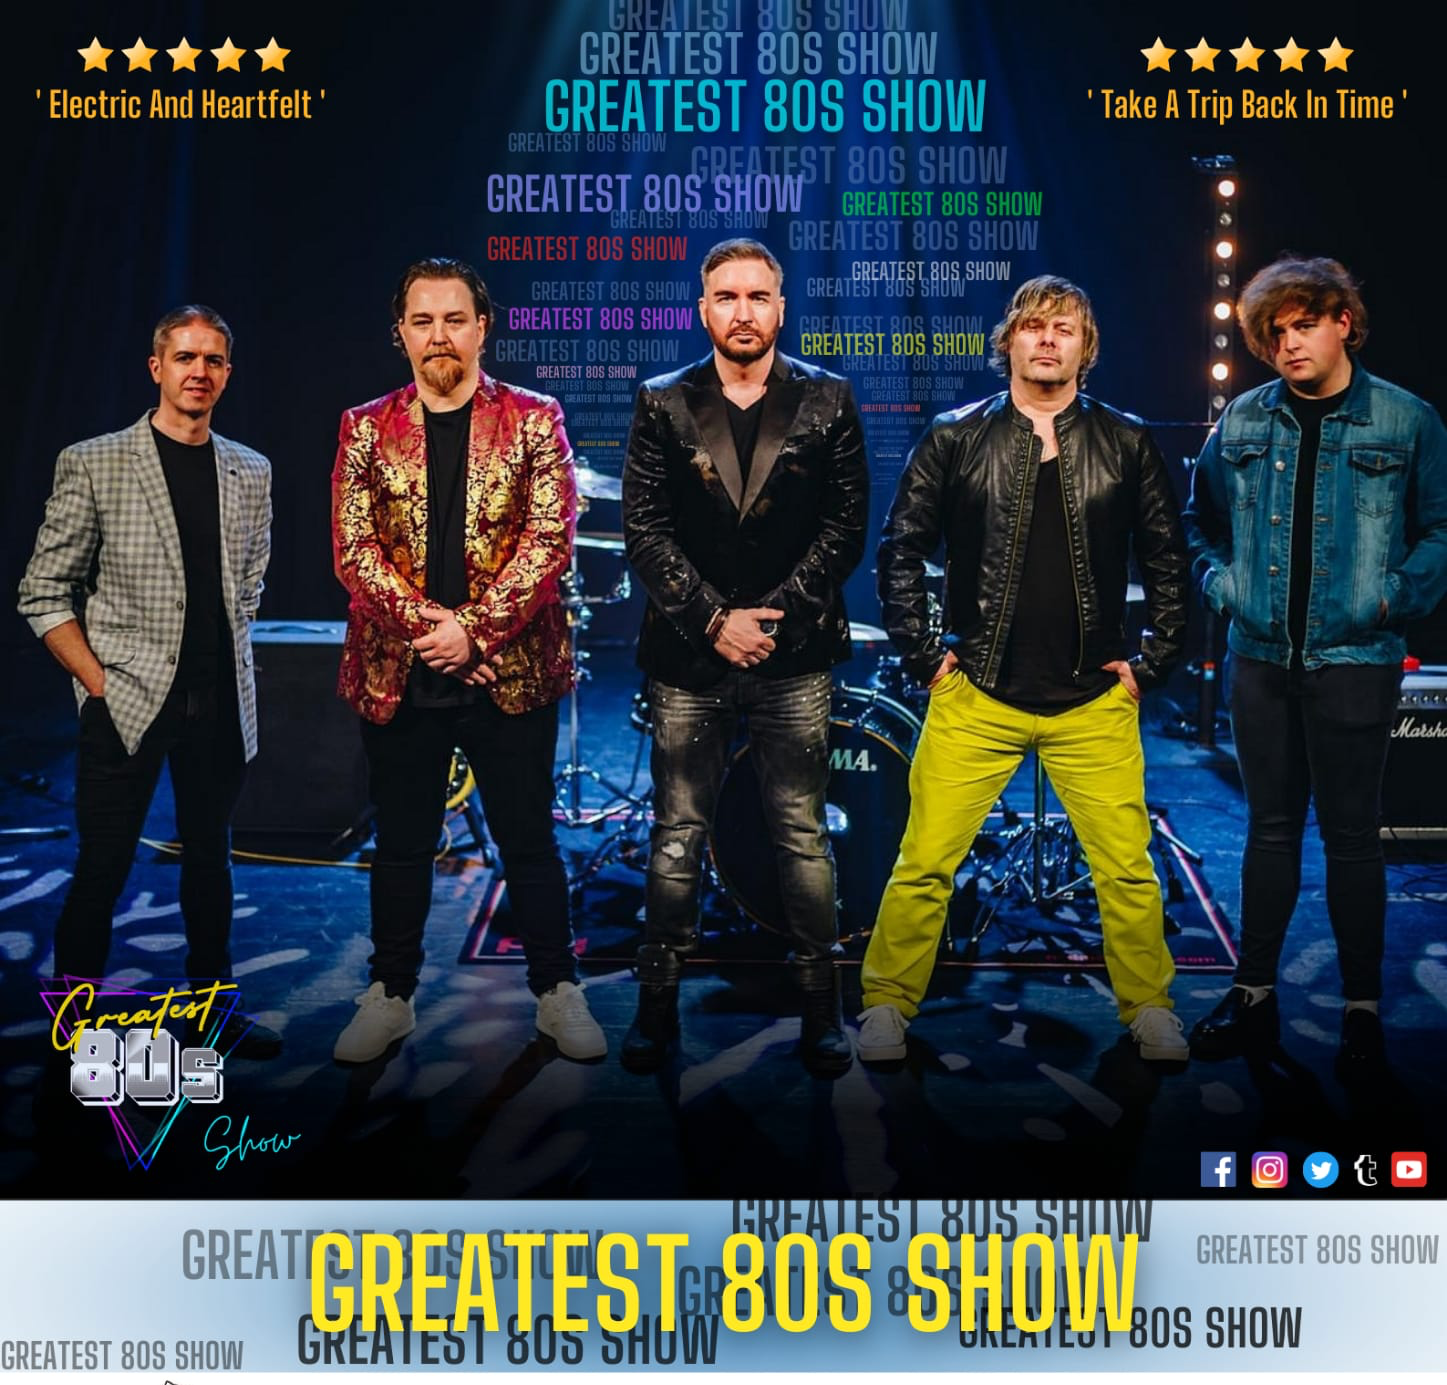 The Greatest 80s Show Dean Crowe Theatre Athlone.